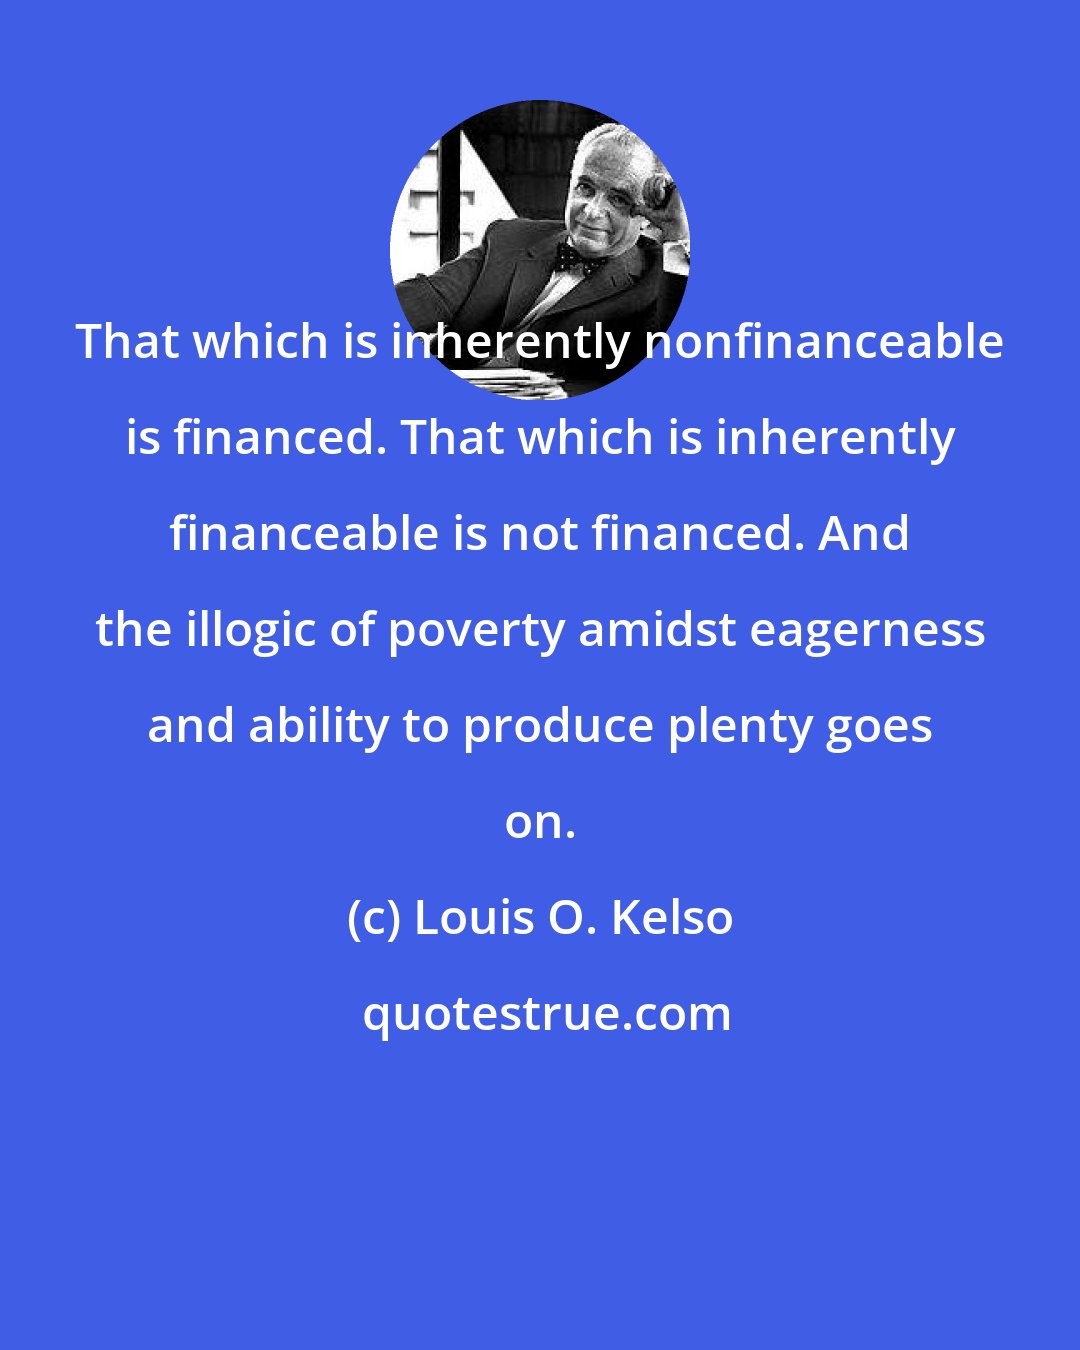 Louis O. Kelso: That which is inherently nonfinanceable is financed. That which is inherently financeable is not financed. And the illogic of poverty amidst eagerness and ability to produce plenty goes on.